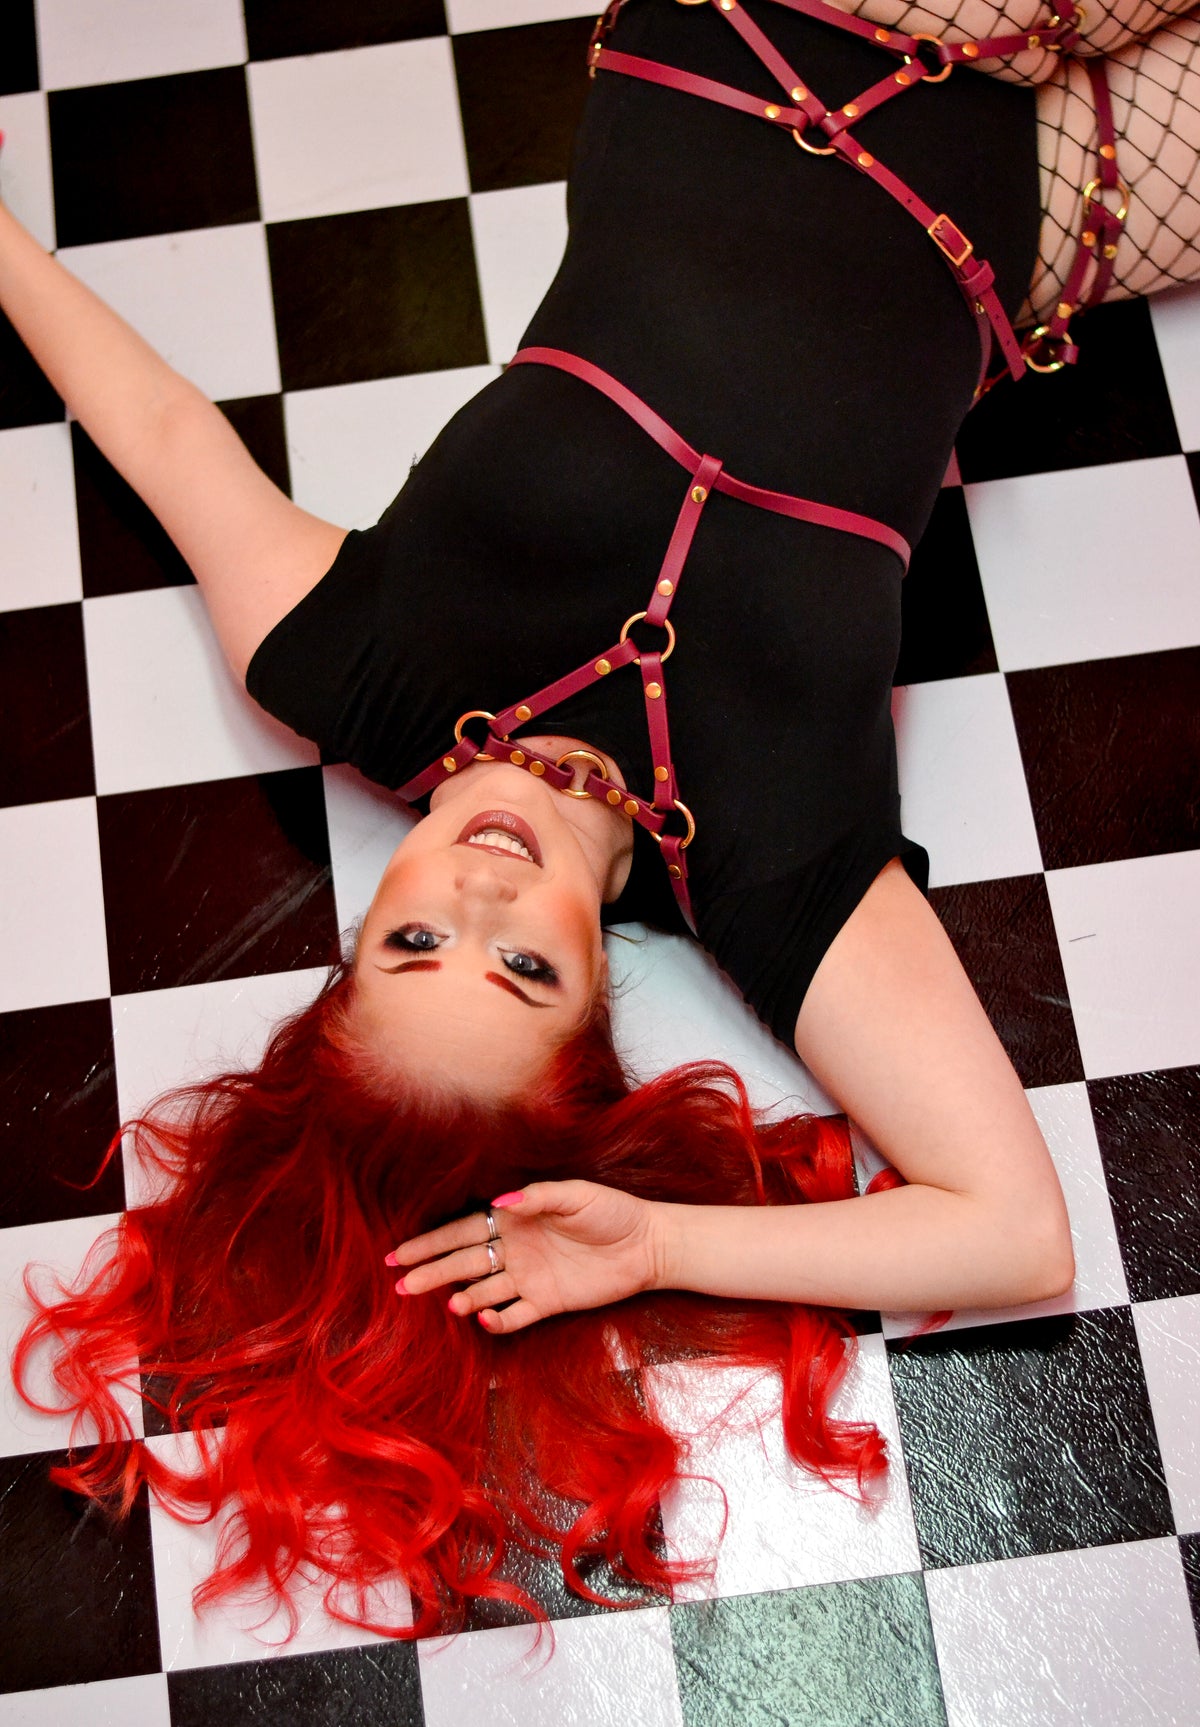 Woman with red hair laying on a checkered floor while wearing a red waist harness over a black bodysuit.